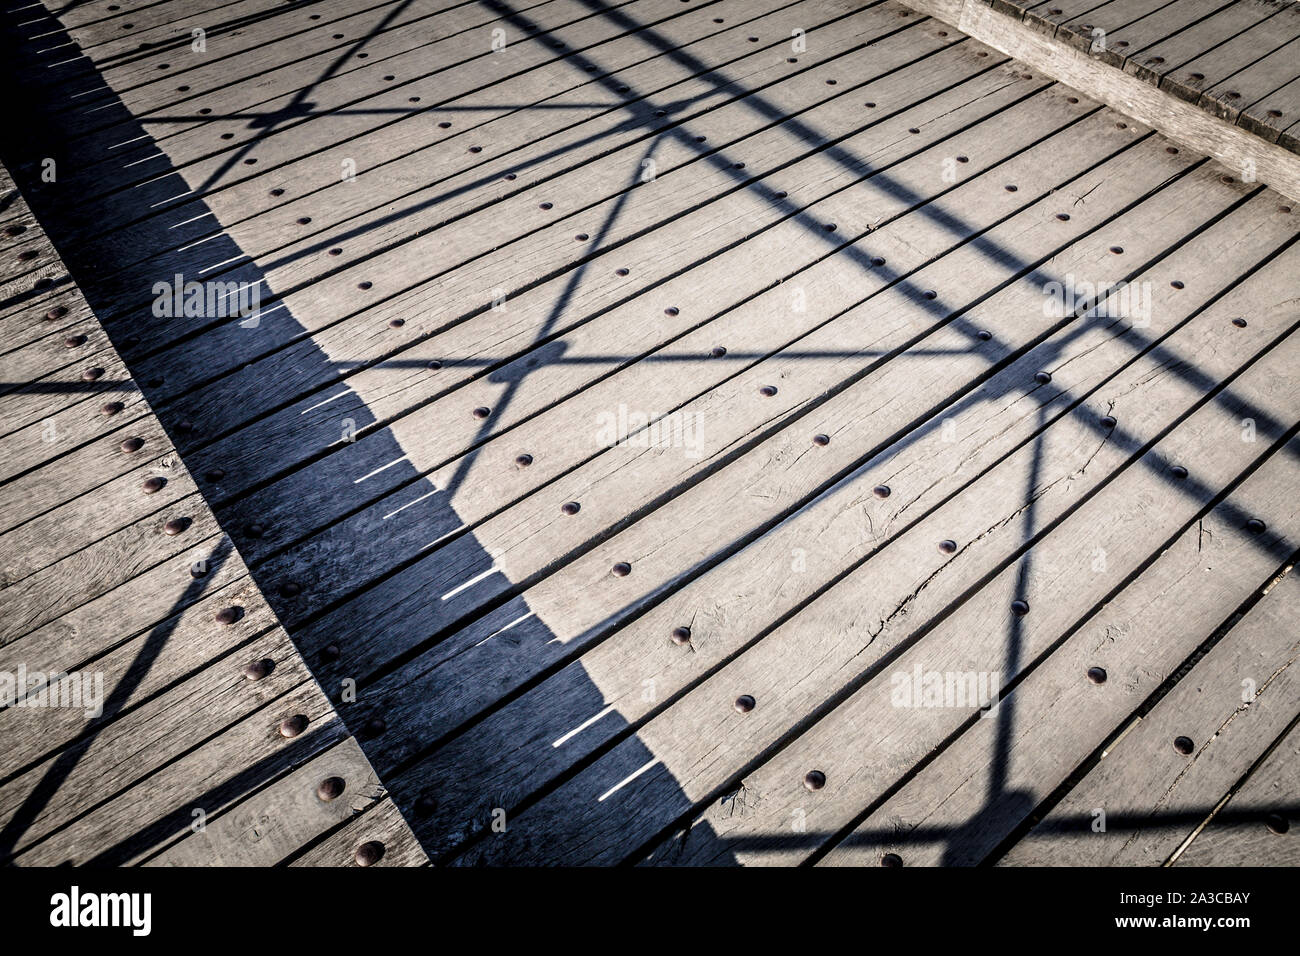 a weathered wooden bridge or decking with the shadow of the railing creating a constrasting pattern on the wood. Stock Photo